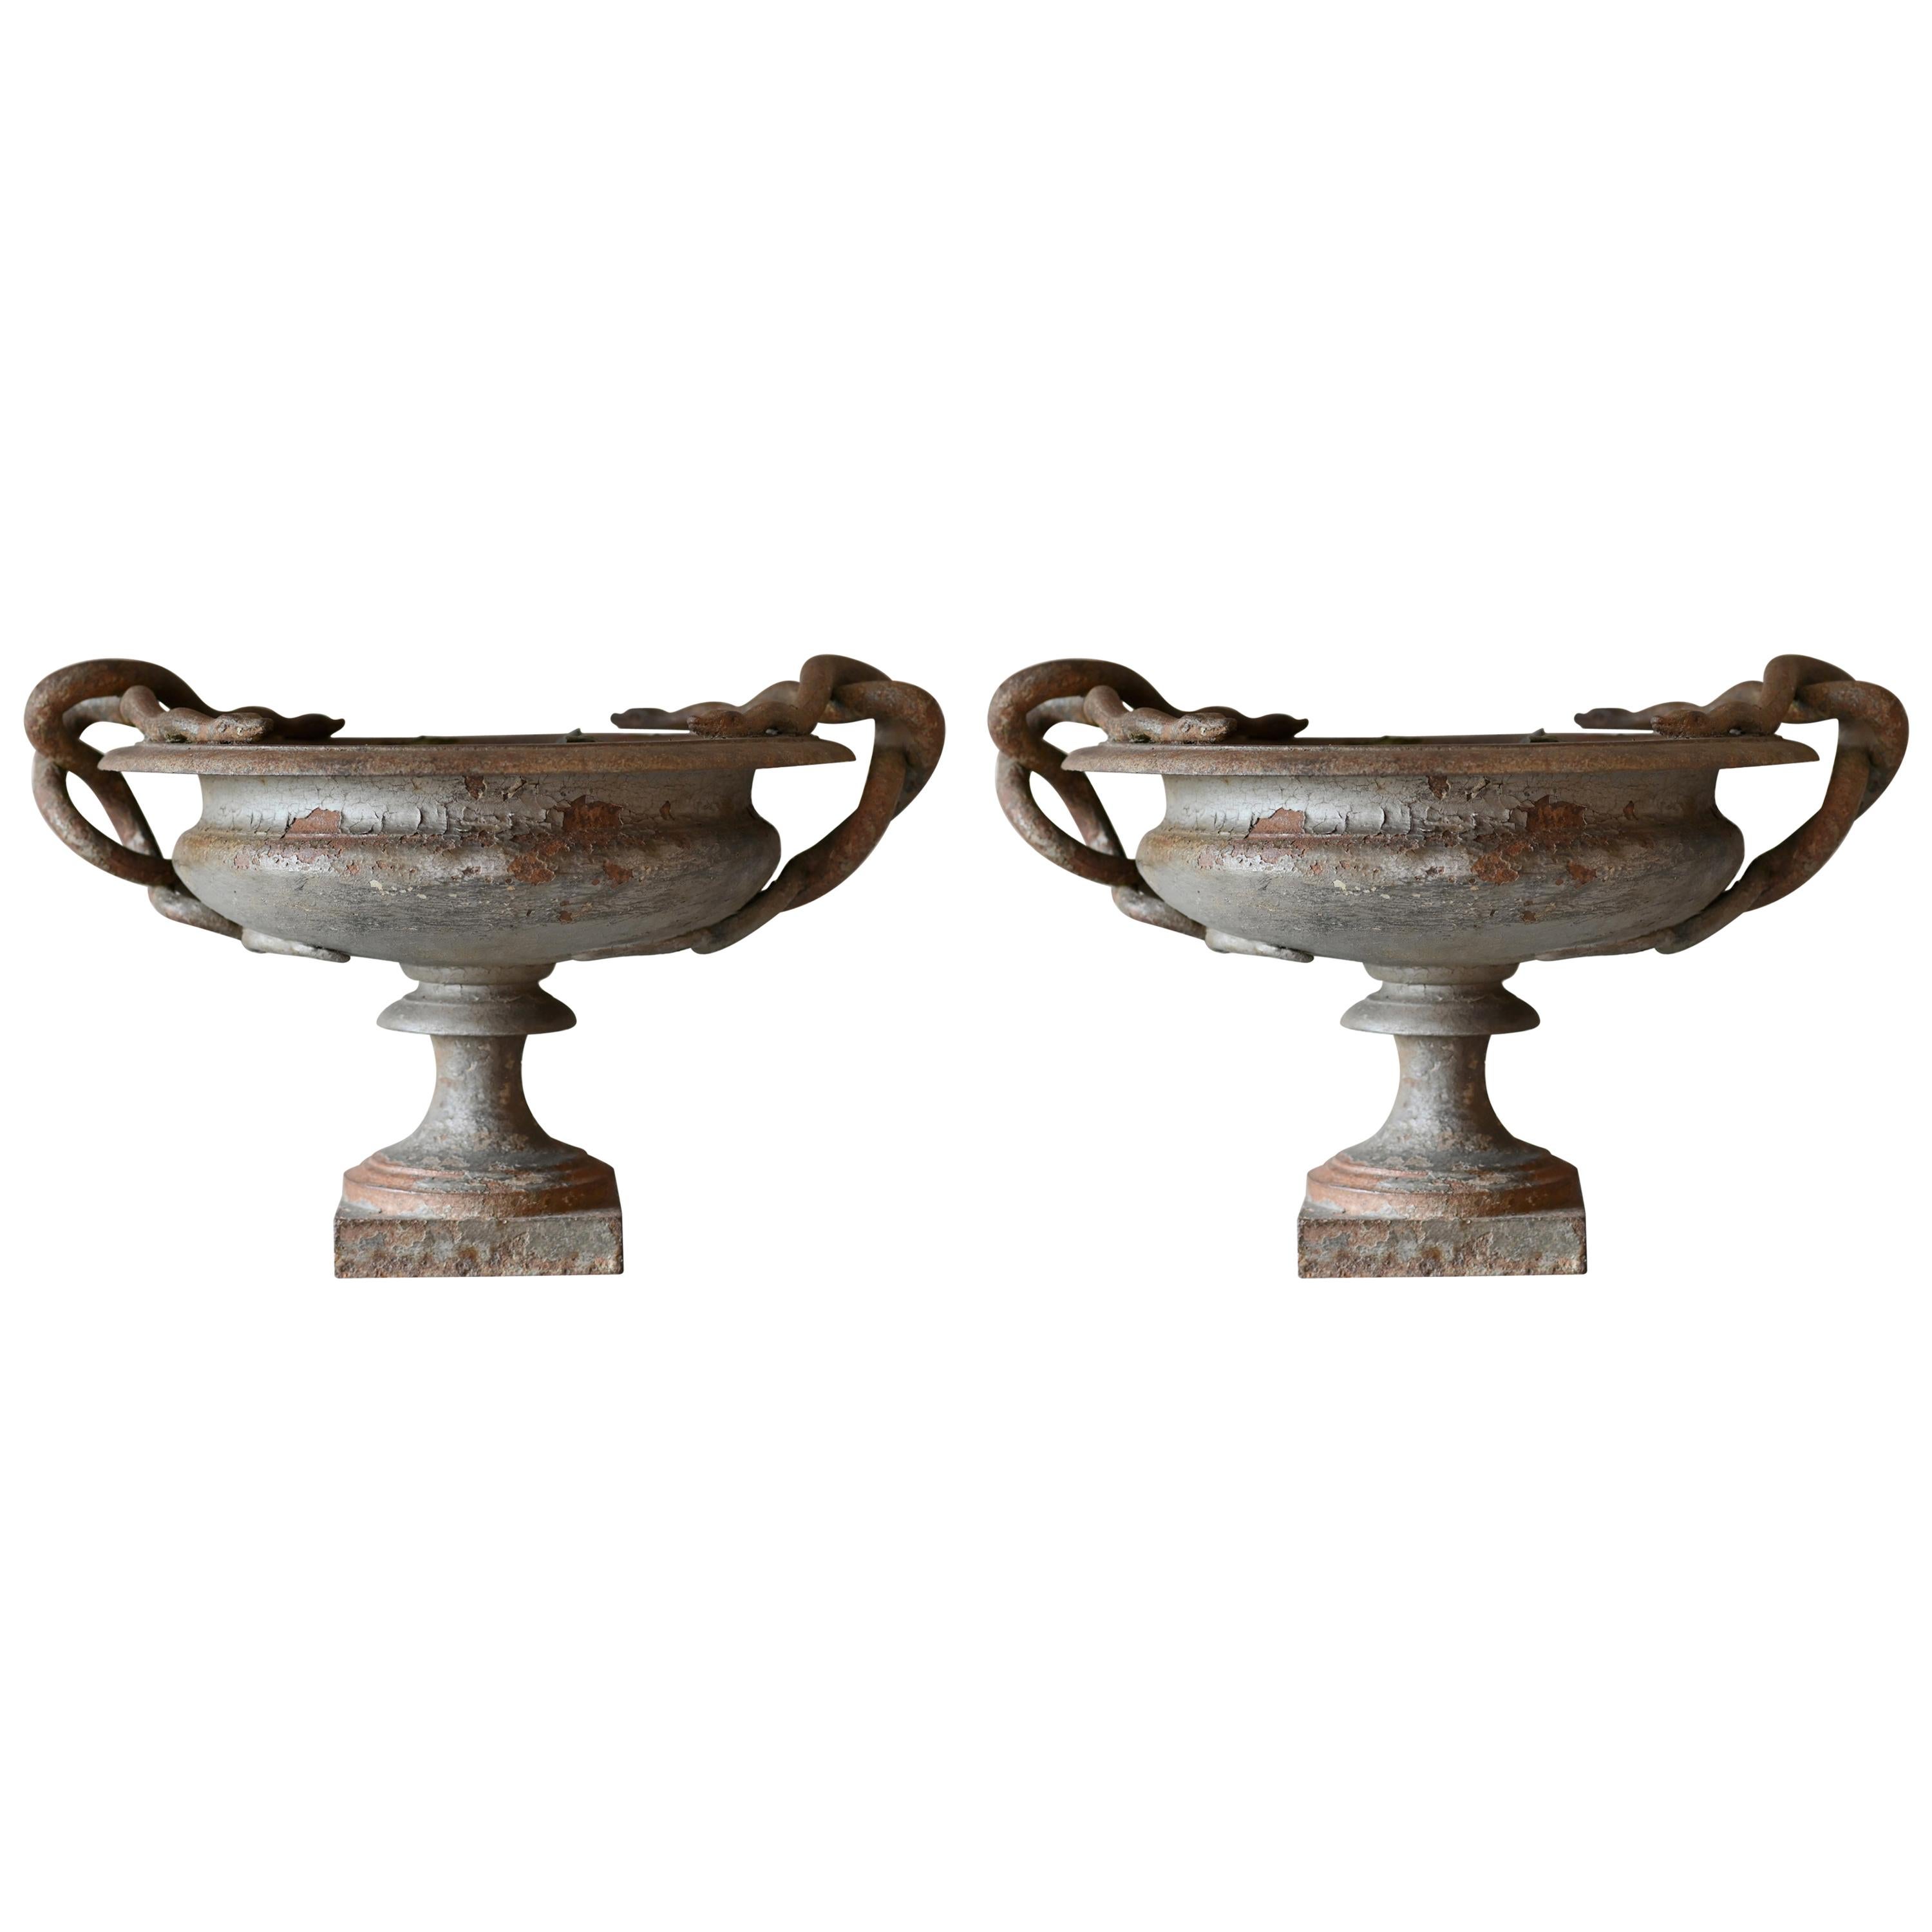 Pair of Snake Vases, Iron, French, Europe, circa 1840-1860, Snake Handles For Sale